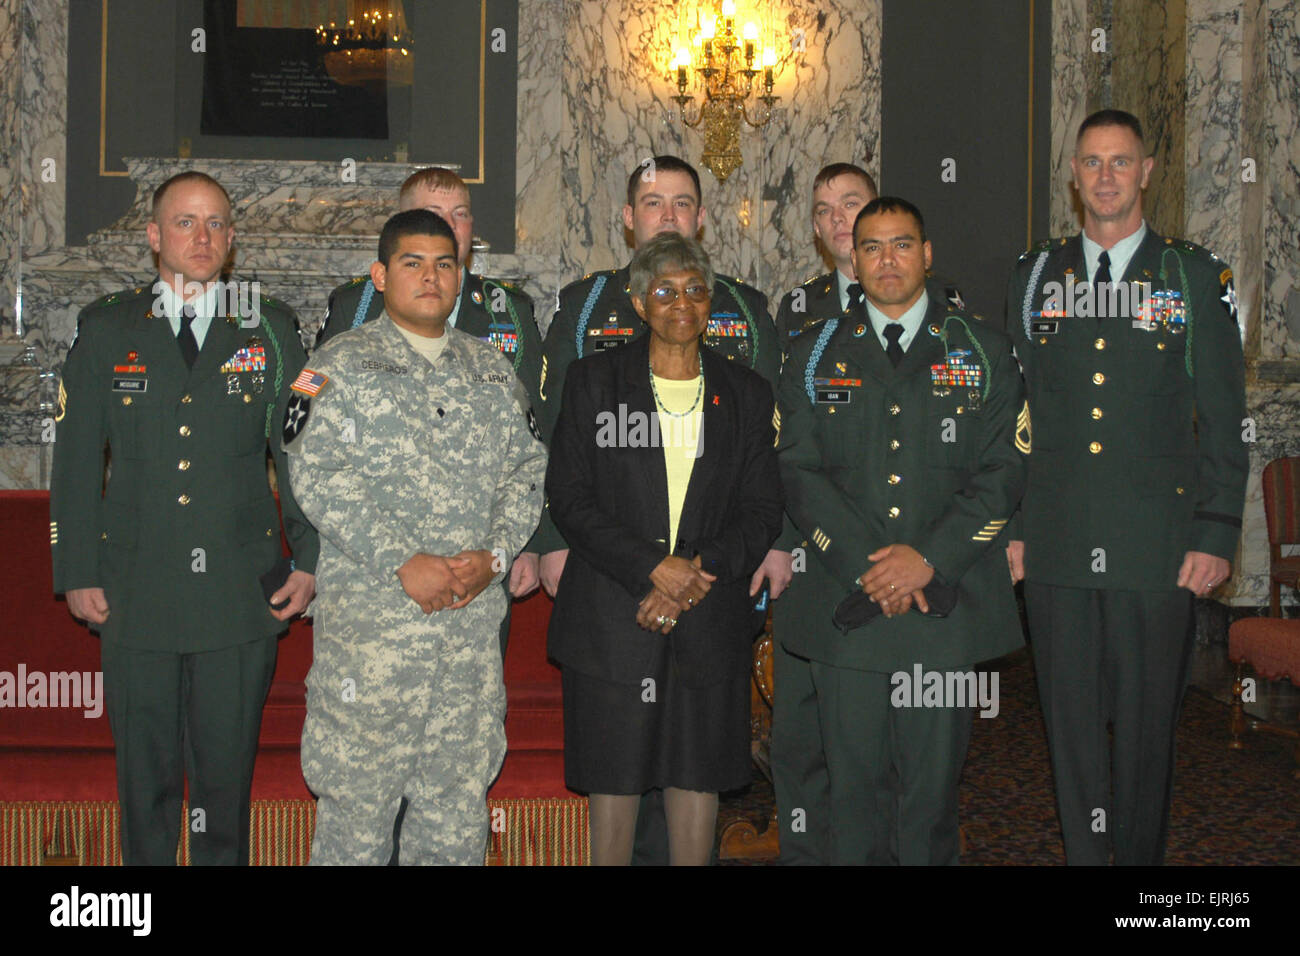 From back left, U.S. Army Staff Sgts. Shawn McGuire, Jon M. Hilliard, David Plush, Steven Peters, Spc. Gildardo Cebreros, Washington State Sen. Rosa Franklin, Sgt. 1st Class Ismael Iban-Cordero and Col. David Funk, commander of 3rd Battalion, 2nd Stryker Brigade Combat Team, gather in Washington, D.C., Feb. 1, 2008, after the Senate Resolution is read on the Senate floor for the Silver Star recipients.  Colleen J. Larson Released Stock Photo